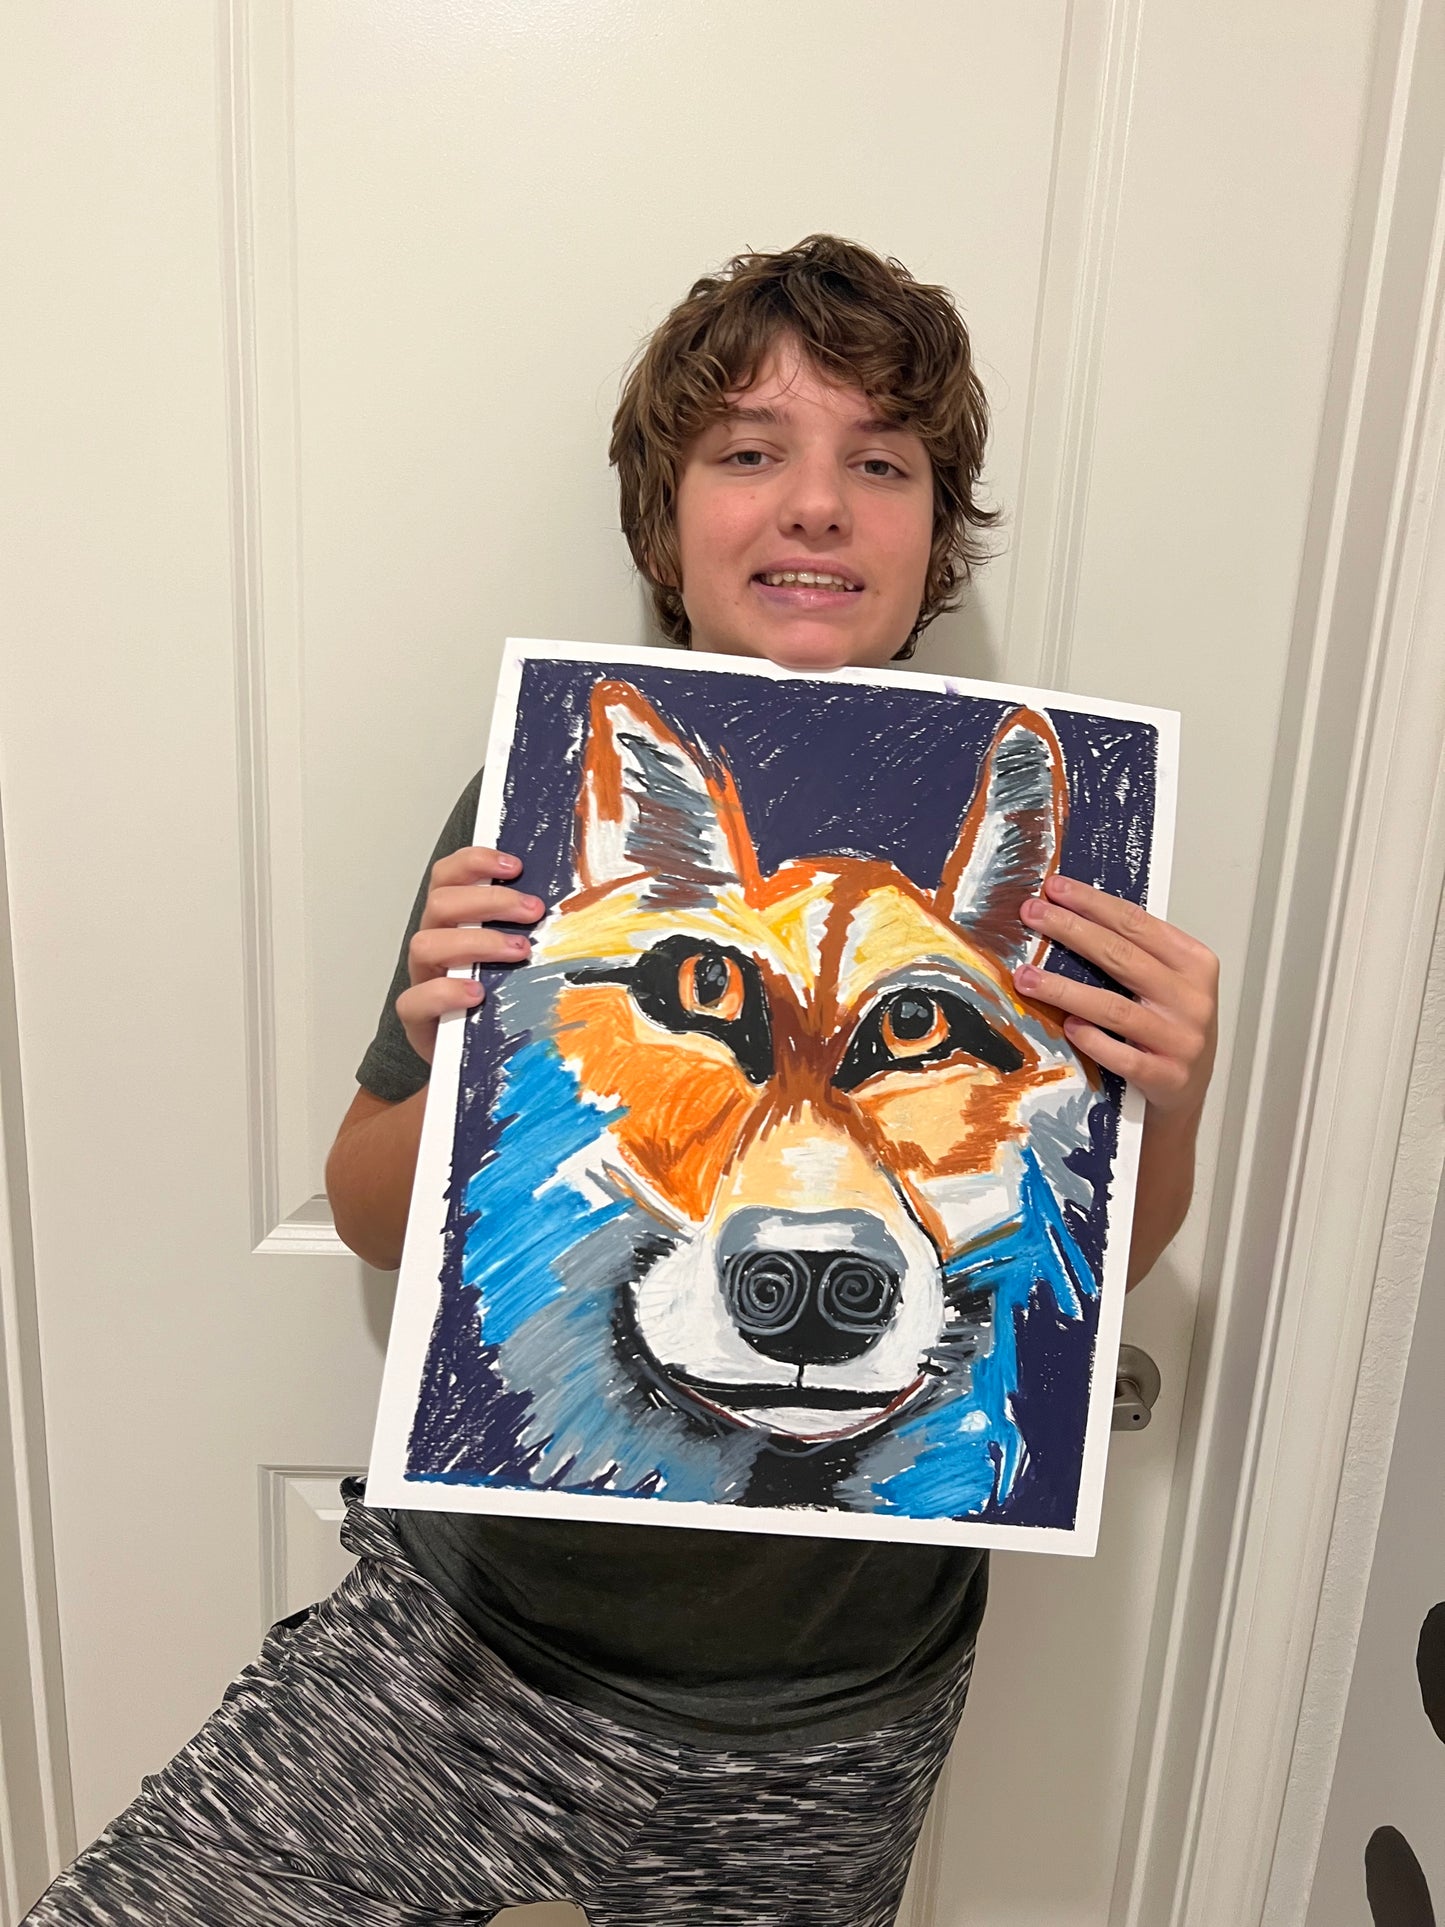 Reynard The Colorful Fox - fine prints and canvas prints in more size